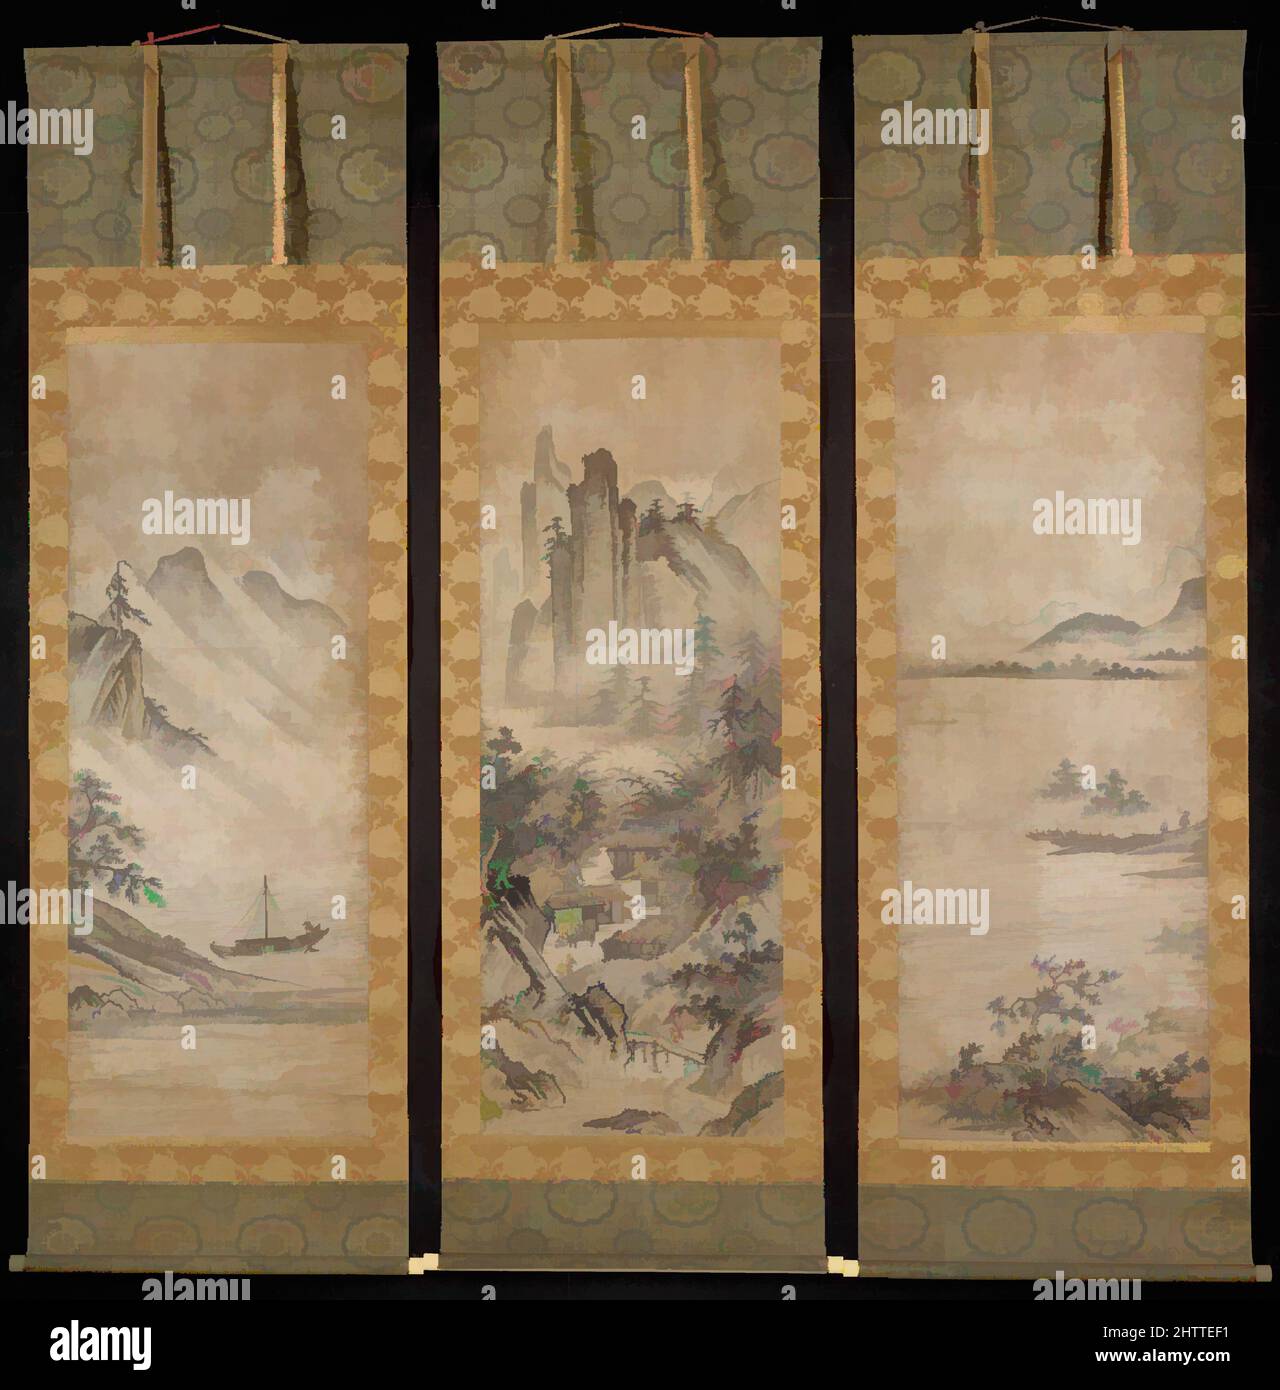 Art inspired by Eight Views of Xiao and Xiang, Muromachi period (1392–1573), 16th century, Japan, Hanging scroll; ink and color on paper, 60 7/8 x 23 1/4 in. (154.6 x 59.1 cm), Paintings, The theme of the Eight Views of the Xiao and Xiang Rivers celebrates man's emotional response to, Classic works modernized by Artotop with a splash of modernity. Shapes, color and value, eye-catching visual impact on art. Emotions through freedom of artworks in a contemporary way. A timeless message pursuing a wildly creative new direction. Artists turning to the digital medium and creating the Artotop NFT Stock Photo